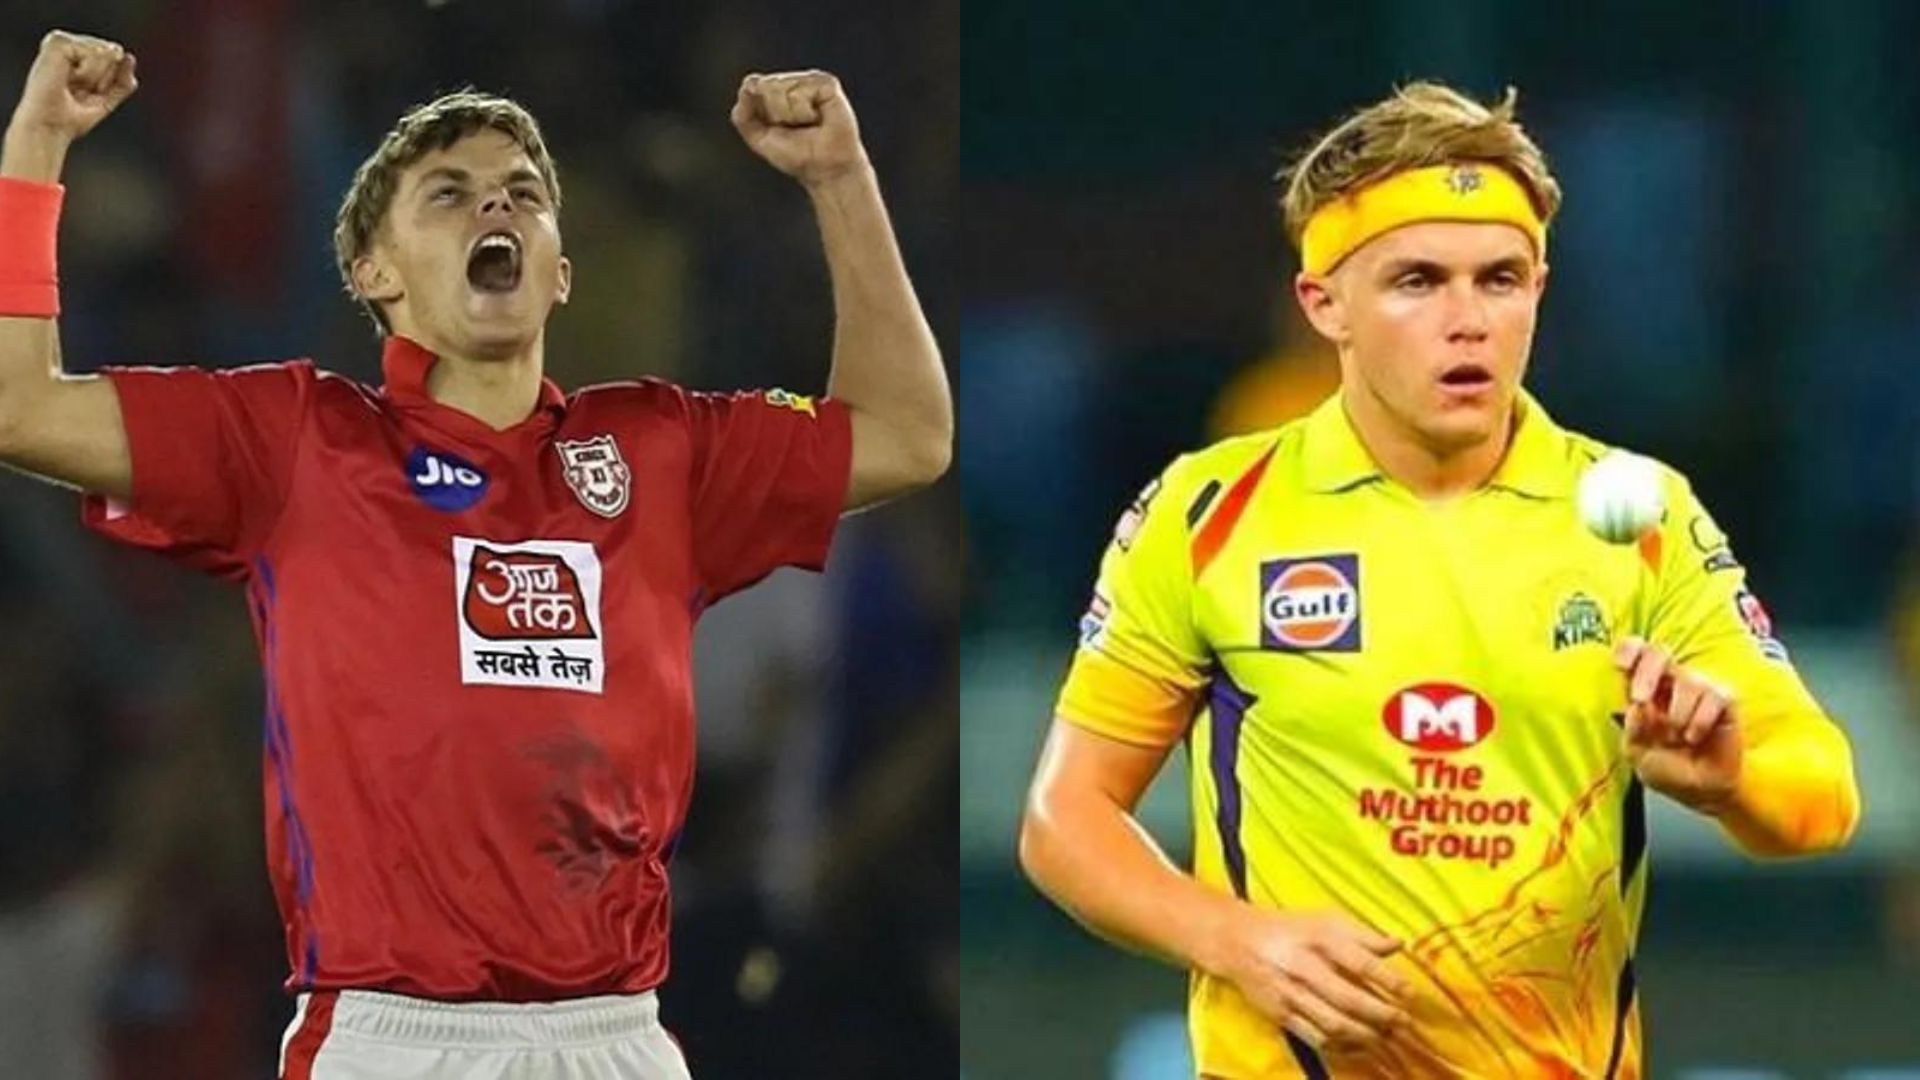 Sam Curran has played for both Punjab and Chennai in the IPL. (P.C.:iplt20.com)